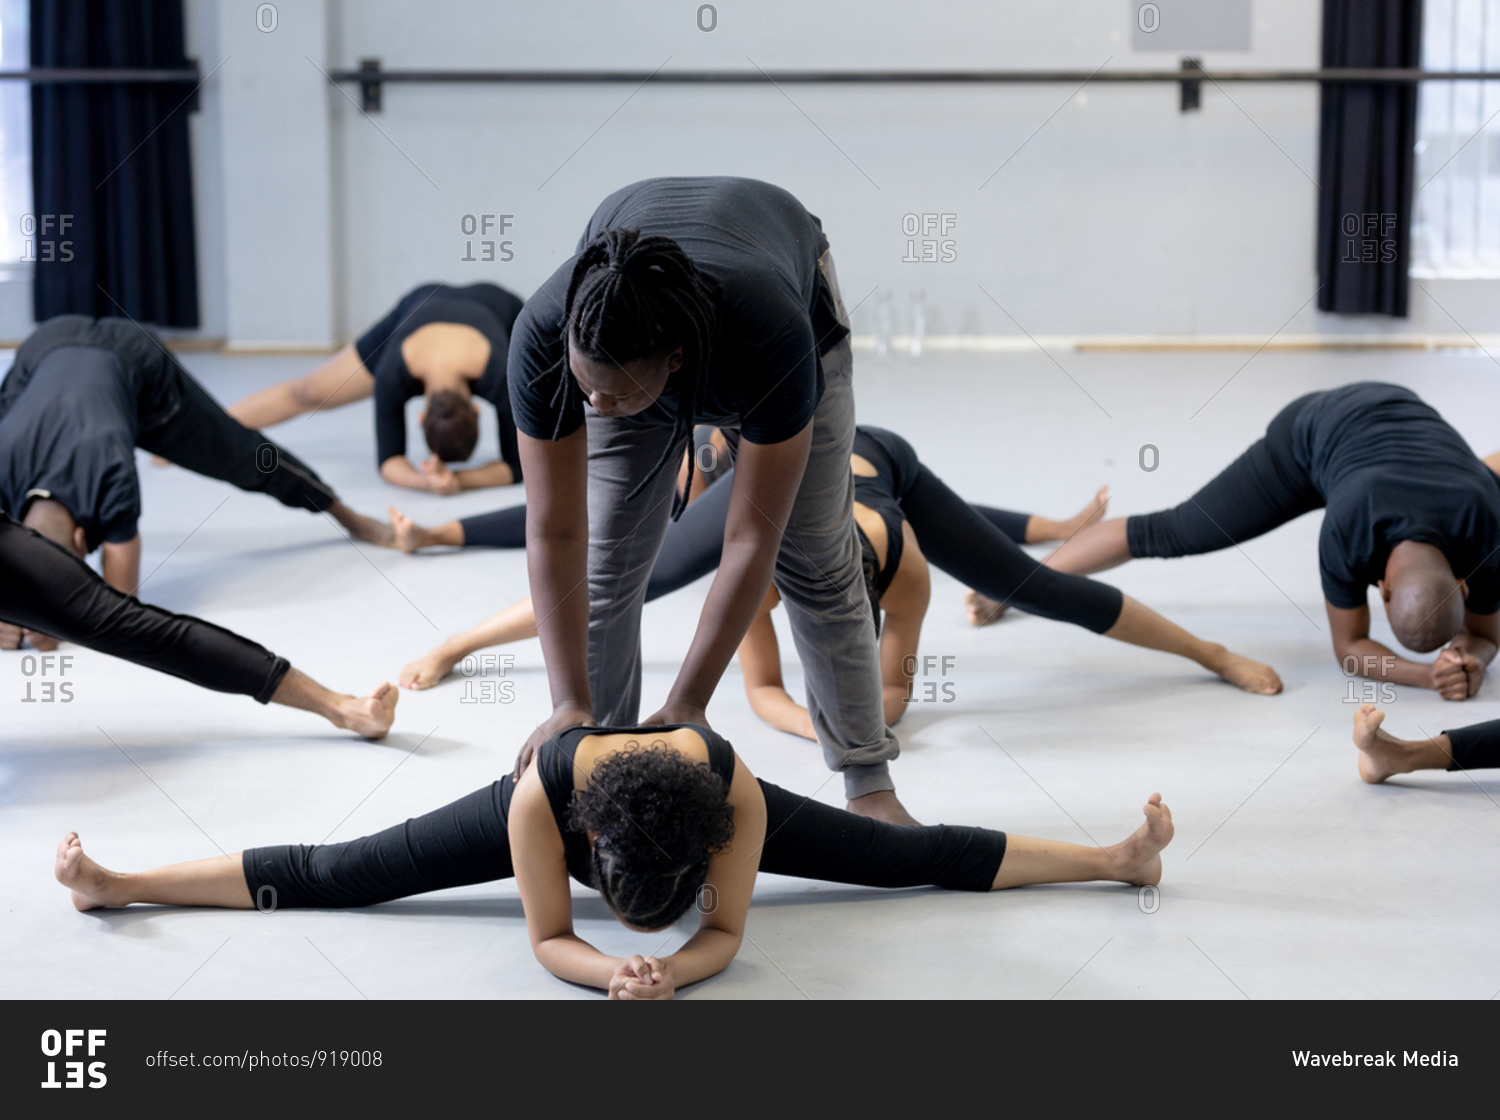 Front view of a mixed race fit male modern dancer wearing black outfit, supporting a female dancer while stretching up during a dance class in a bright studio, with other dancers exercising in the background.